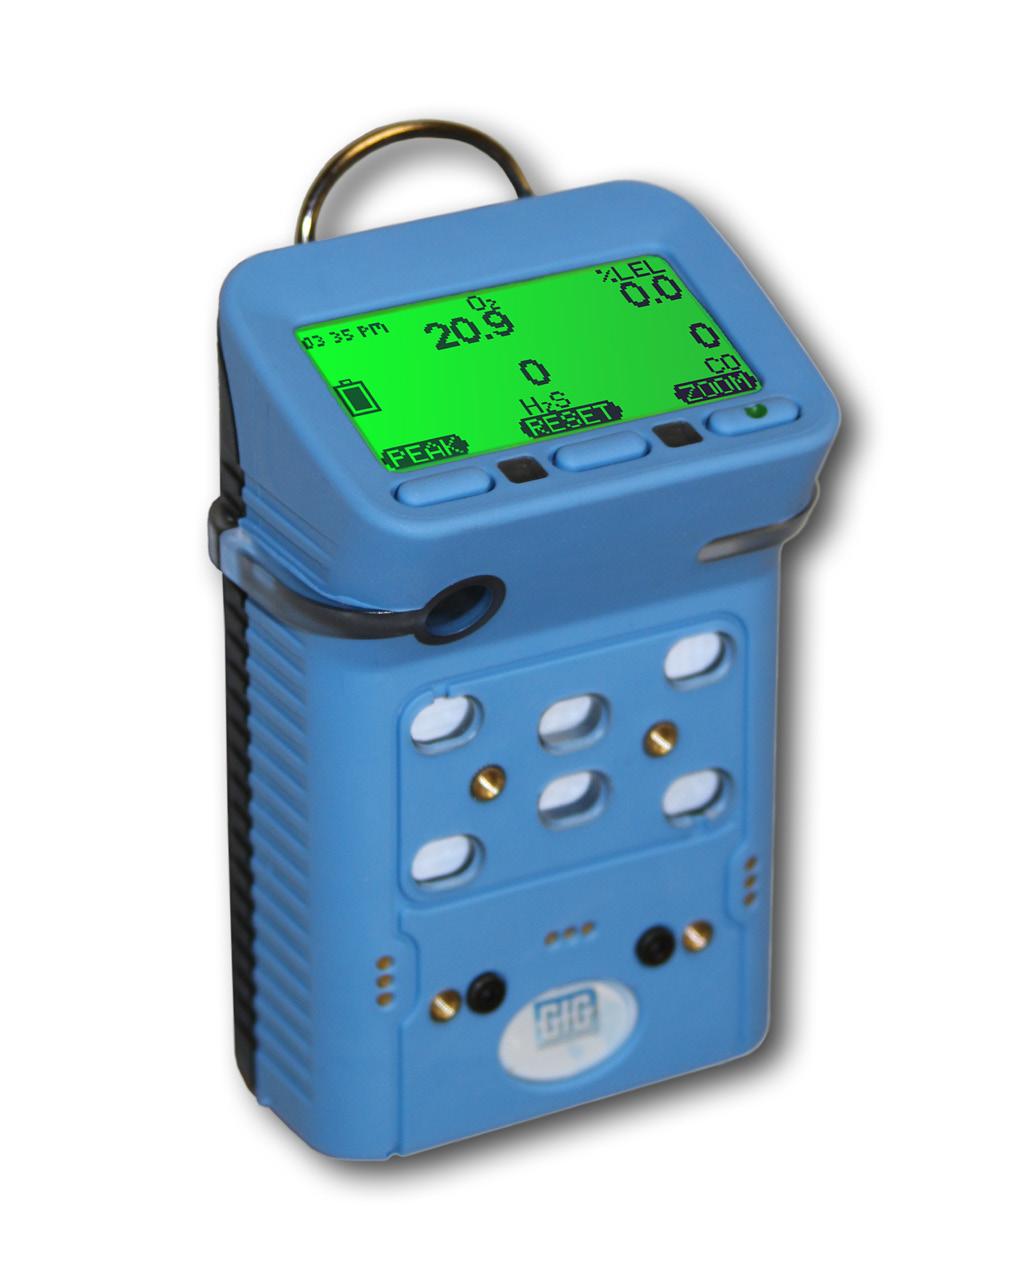 : Setting the alarms in electrochemical sensor equipped toxic gas instruments out of the area before rather than after the concentration of toxic gas exceeds the hazardous condition threshold.